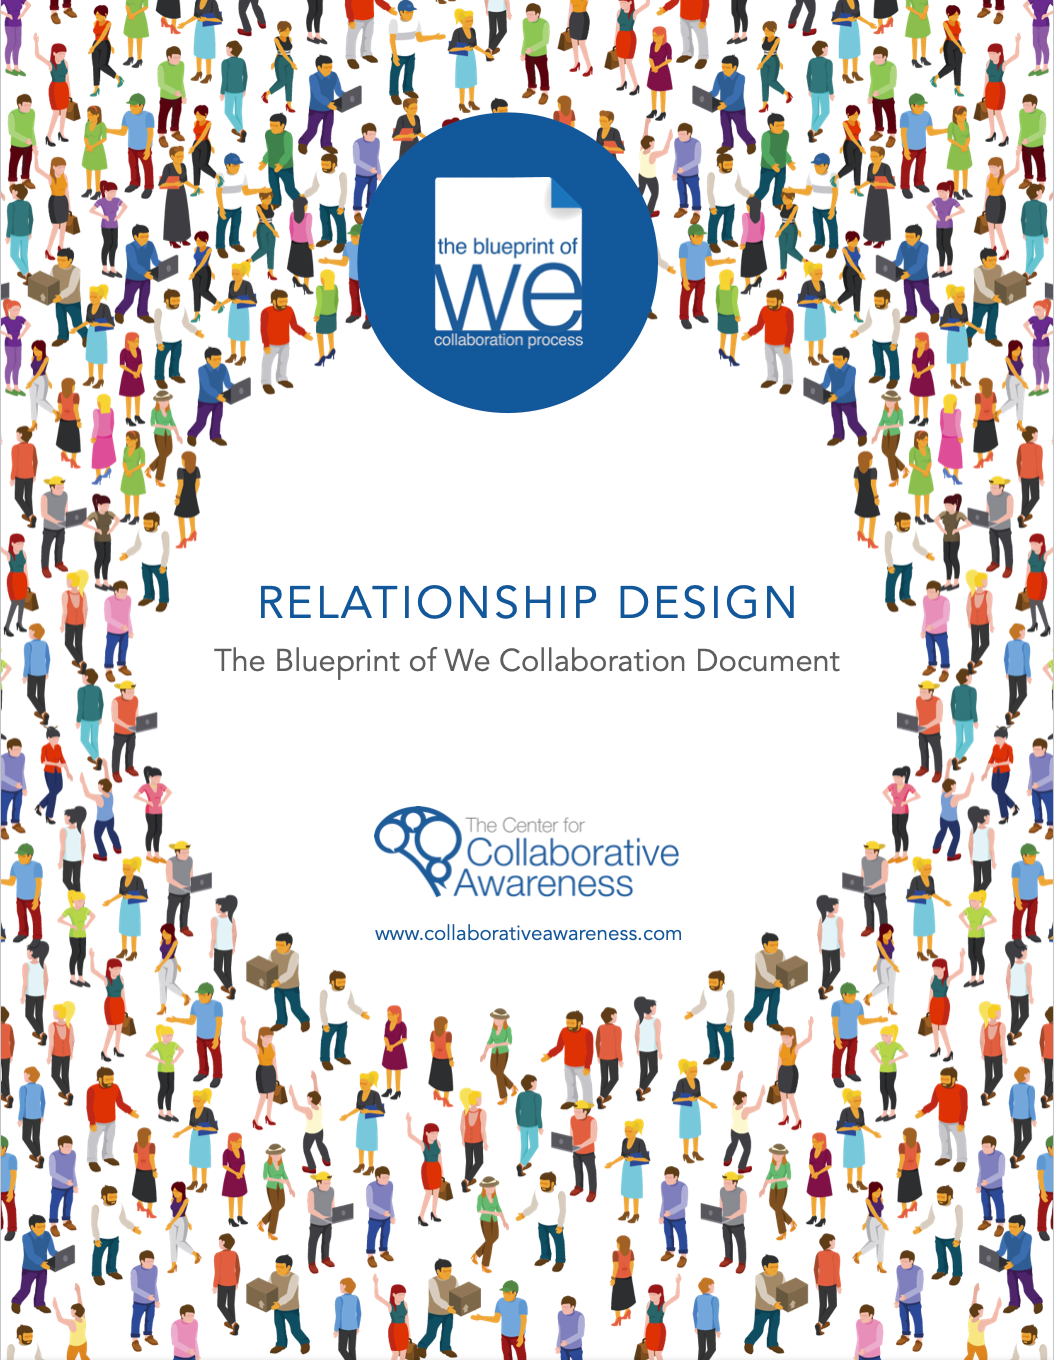 FREE eBOOK: Relationship Design—The Blueprint of We Collaboration Process